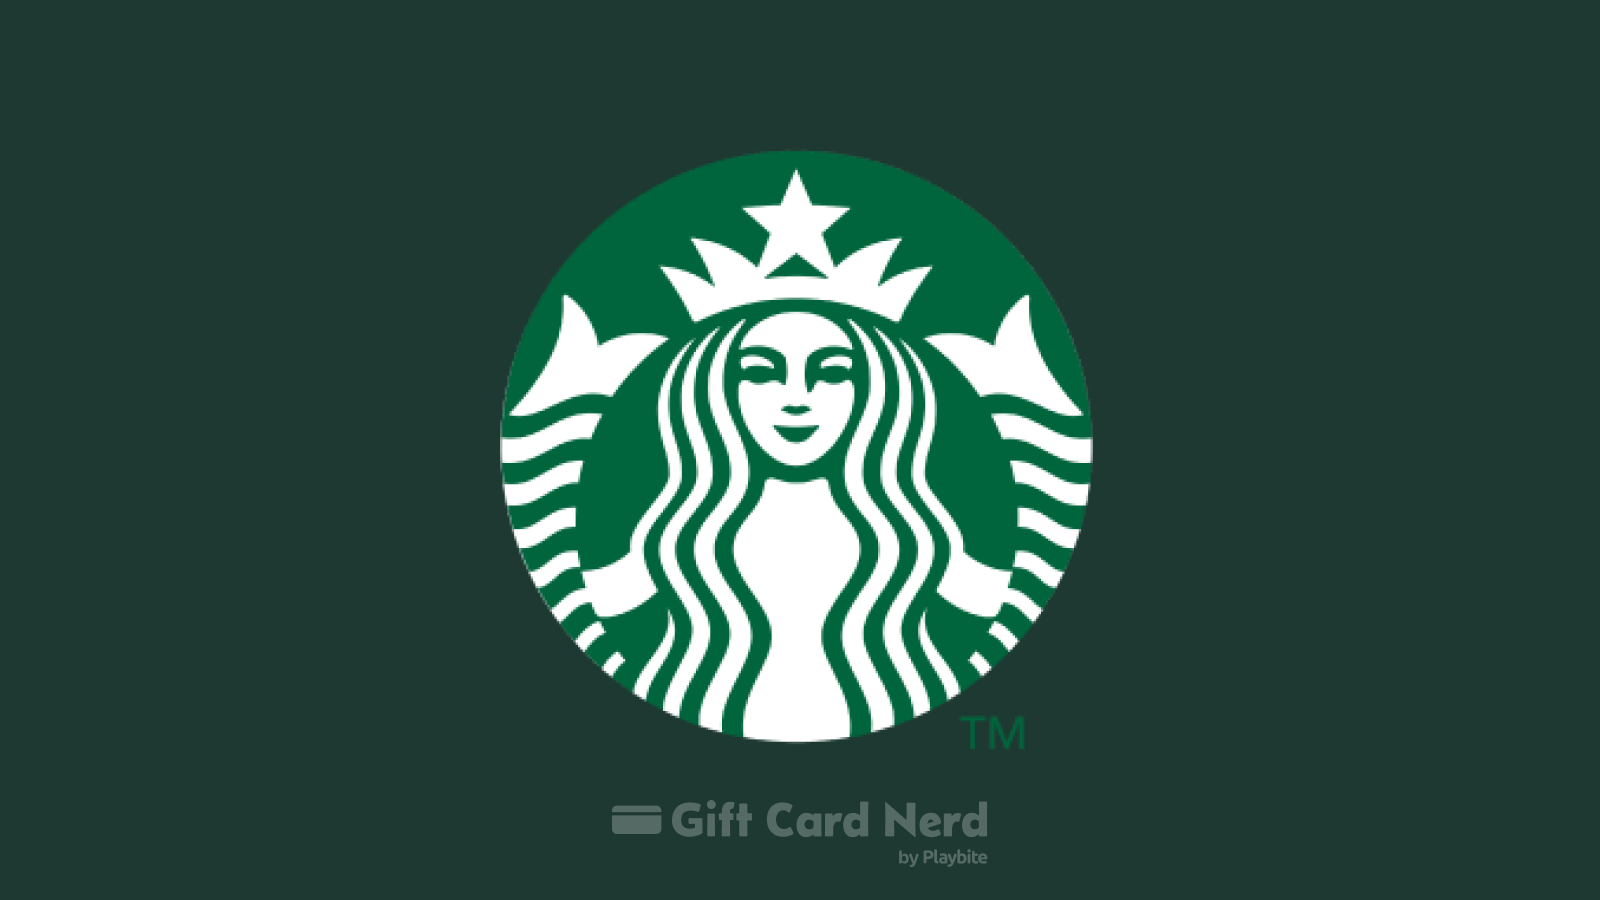 Can I Use a Starbucks Gift Card on Cash App?